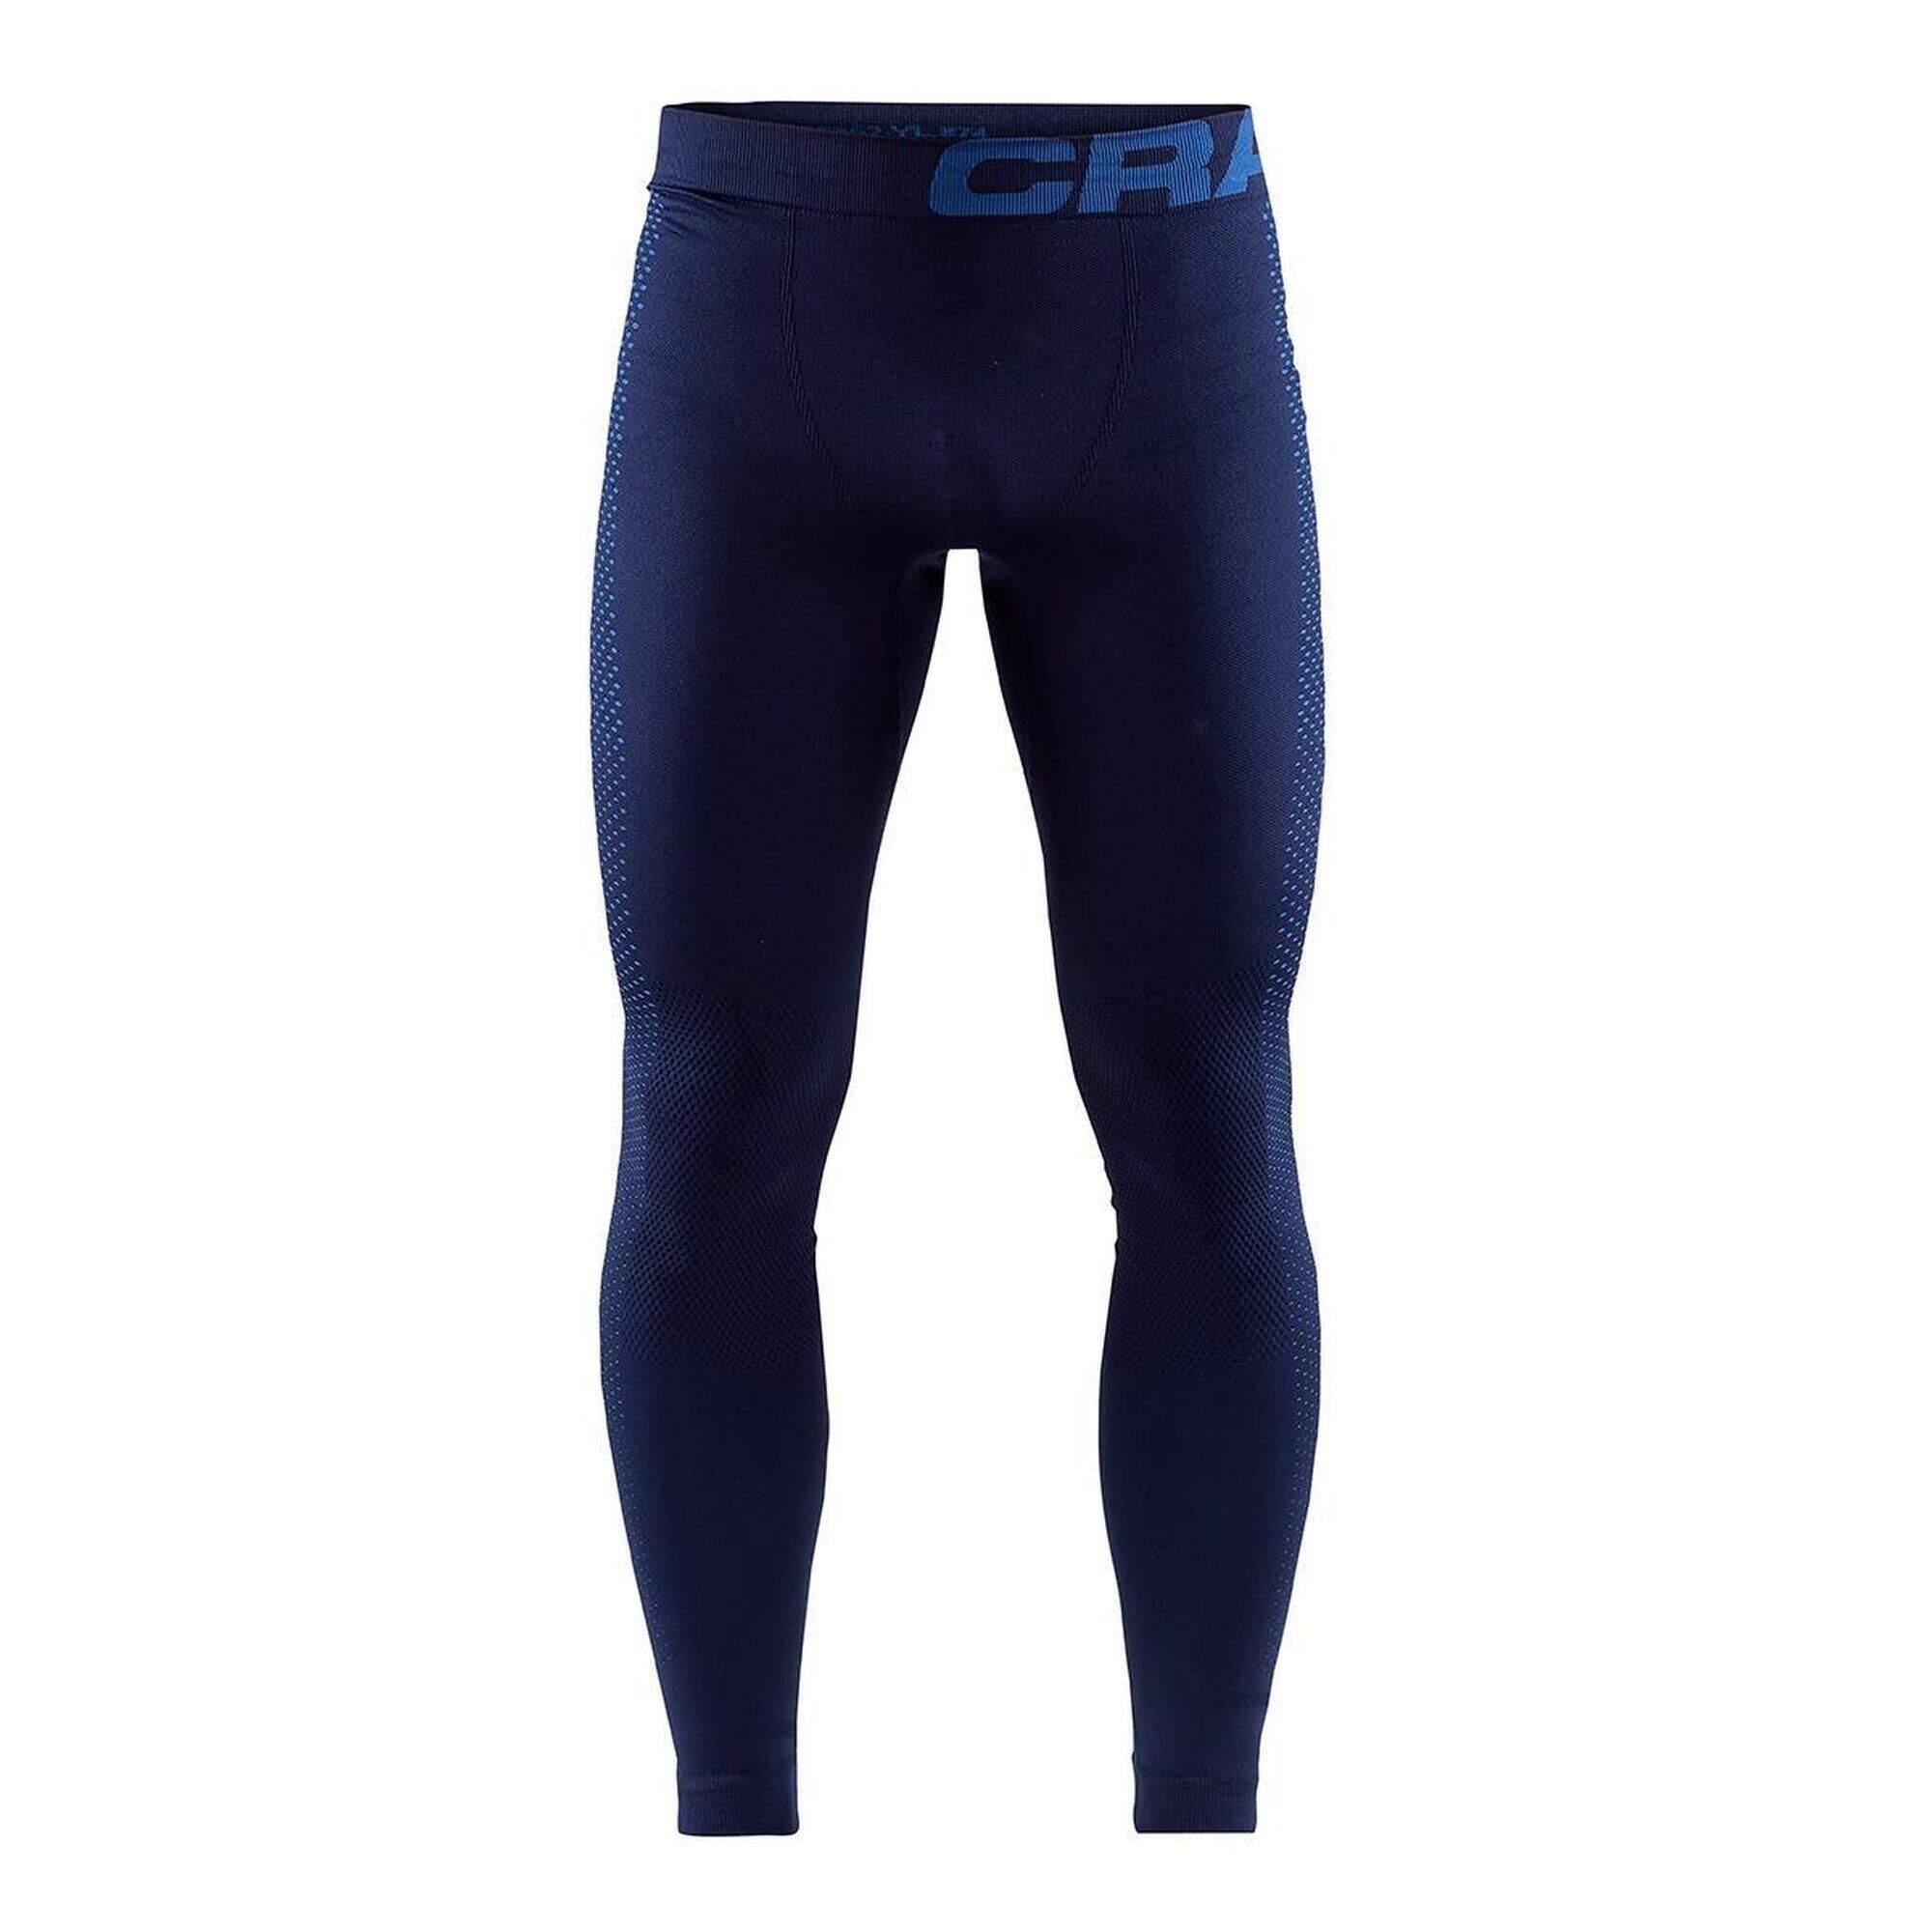 Sports and Leisure :: Sports material and equipment :: Leggings :: Sports  Leggings for Men Mares Polygon 50 Dark blue